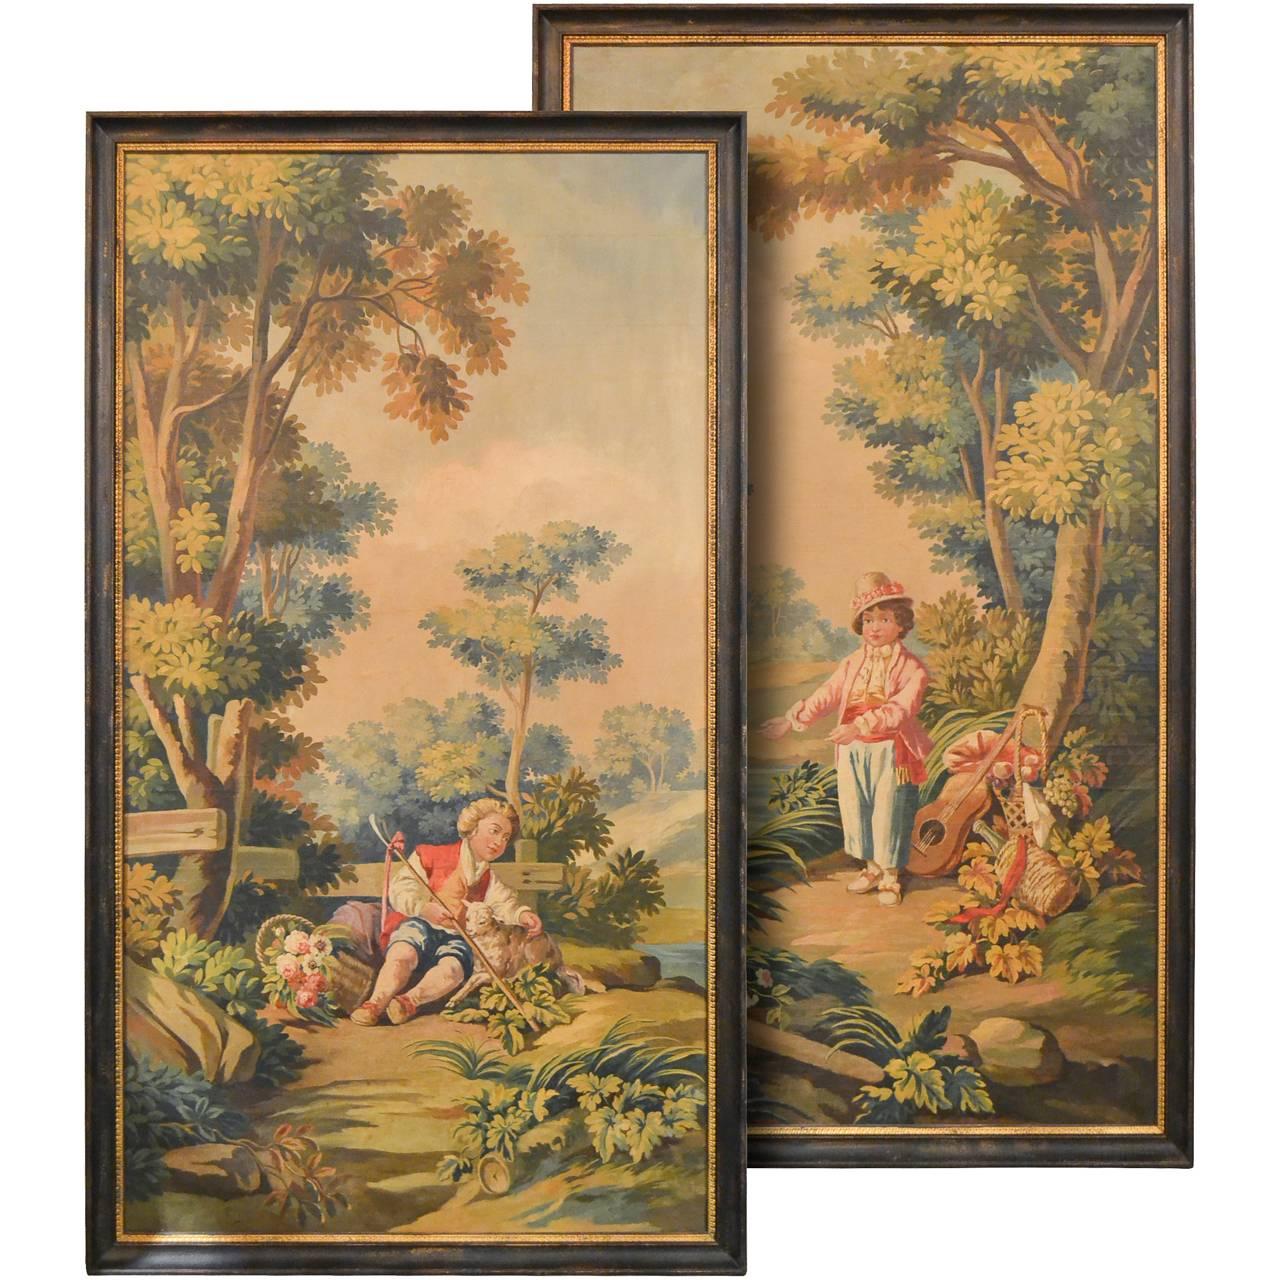 Magnificent Large Pair of 19th Century, French Classical Scene Paintings